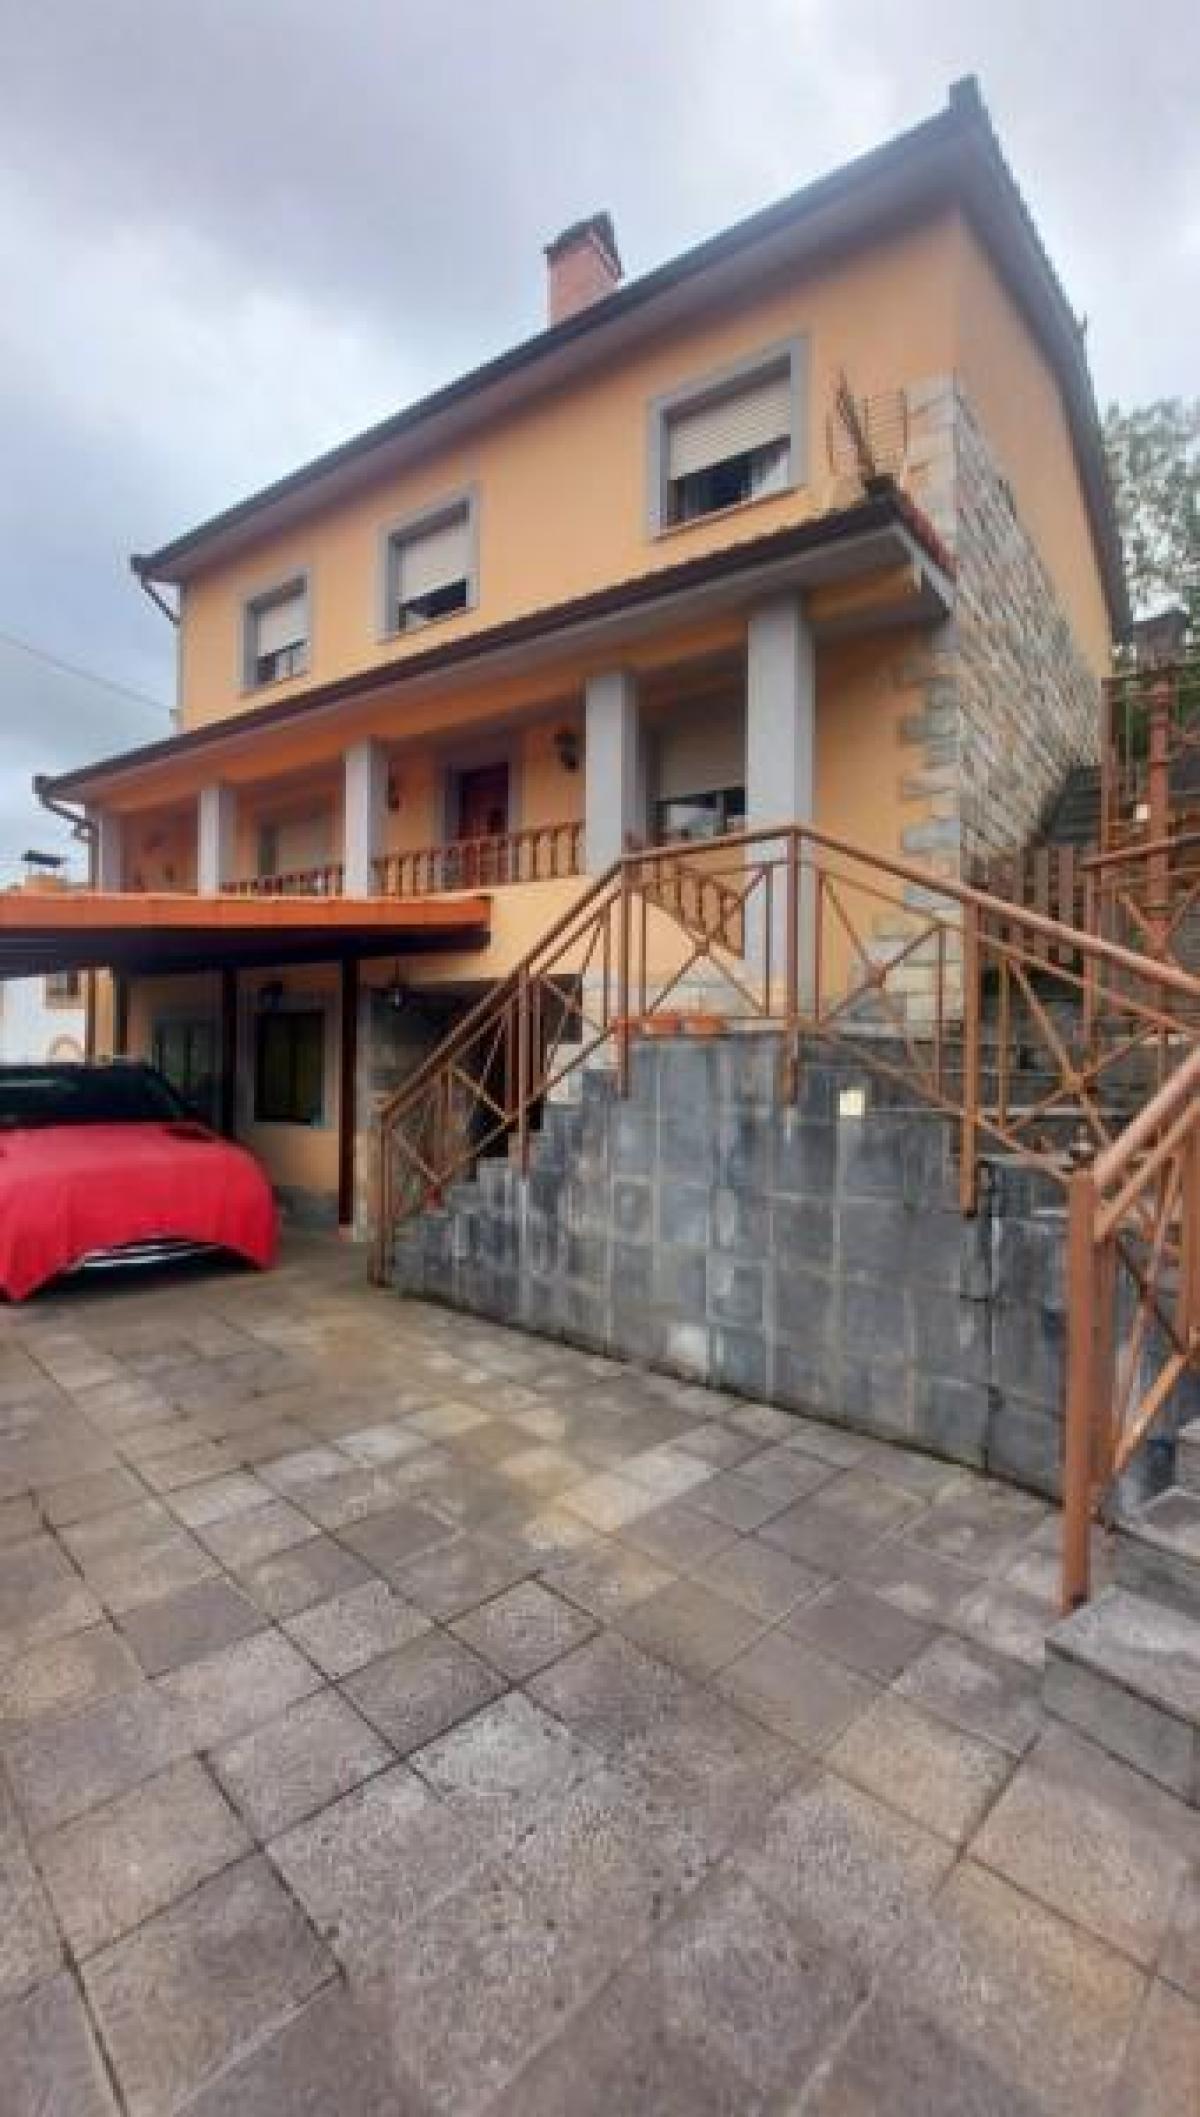 Picture of Home For Sale in Oviedo, Asturias, Spain